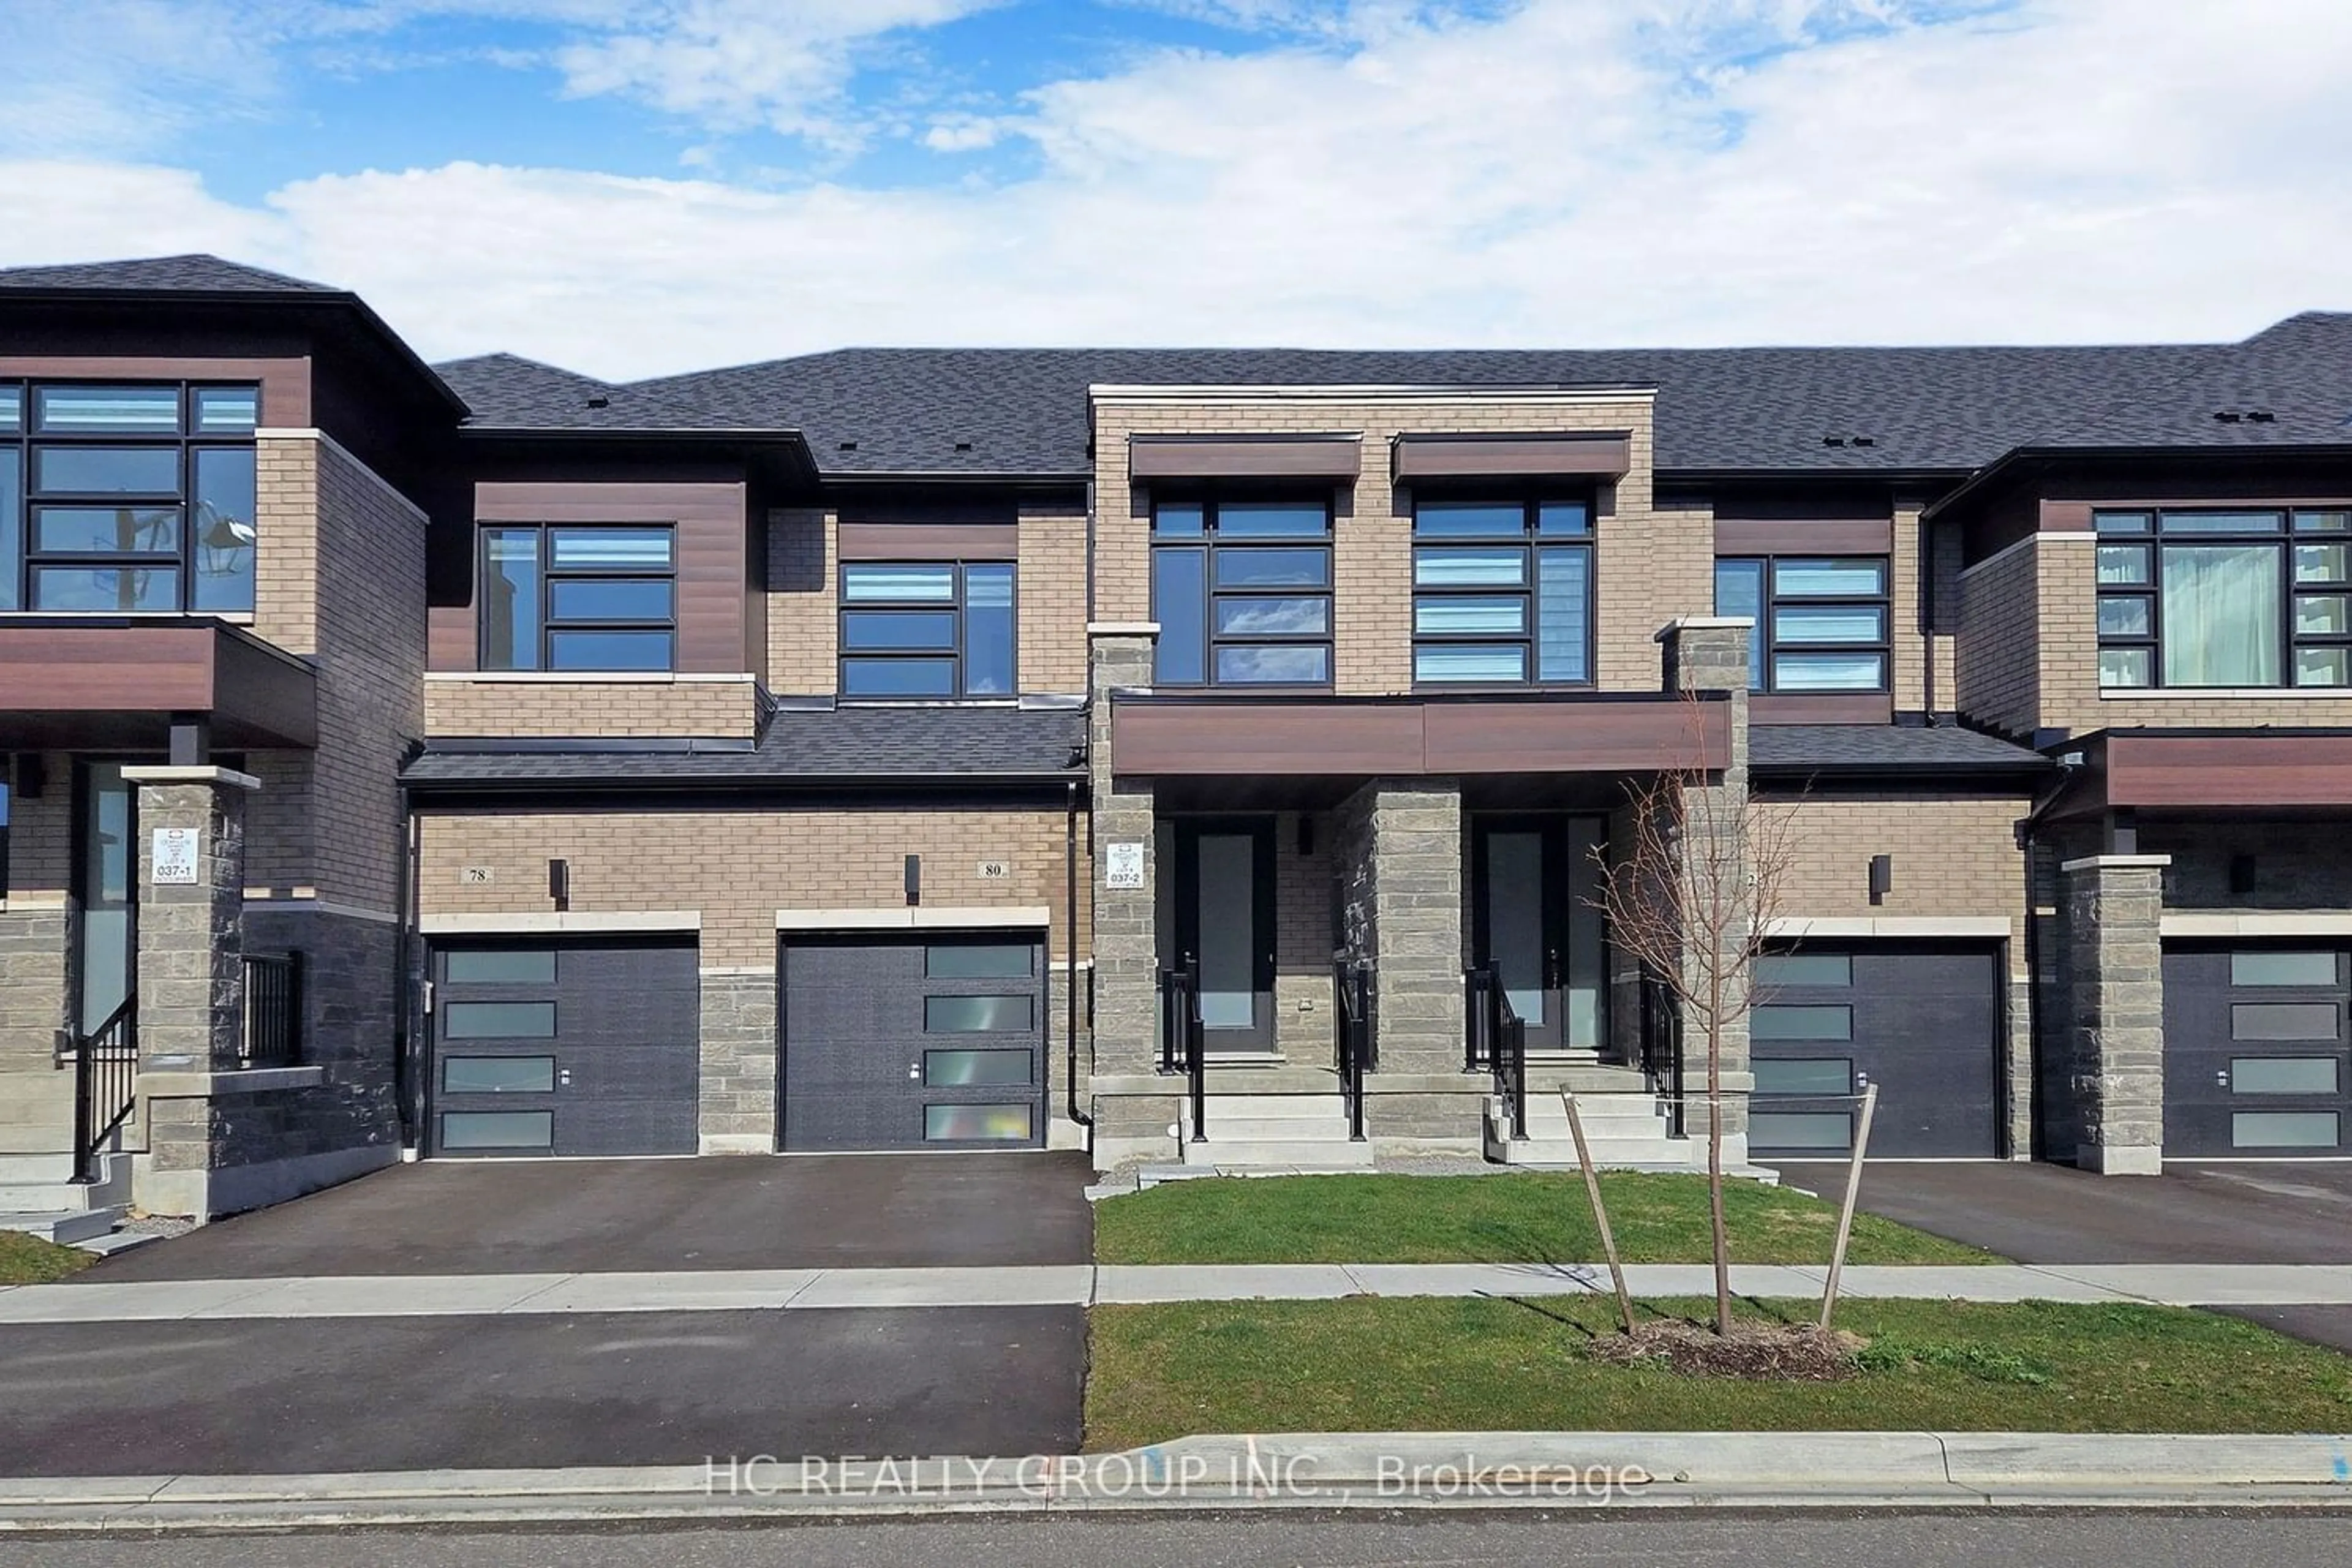 Home with brick exterior material for 80 Boiton St, Richmond Hill Ontario L4S 0M1